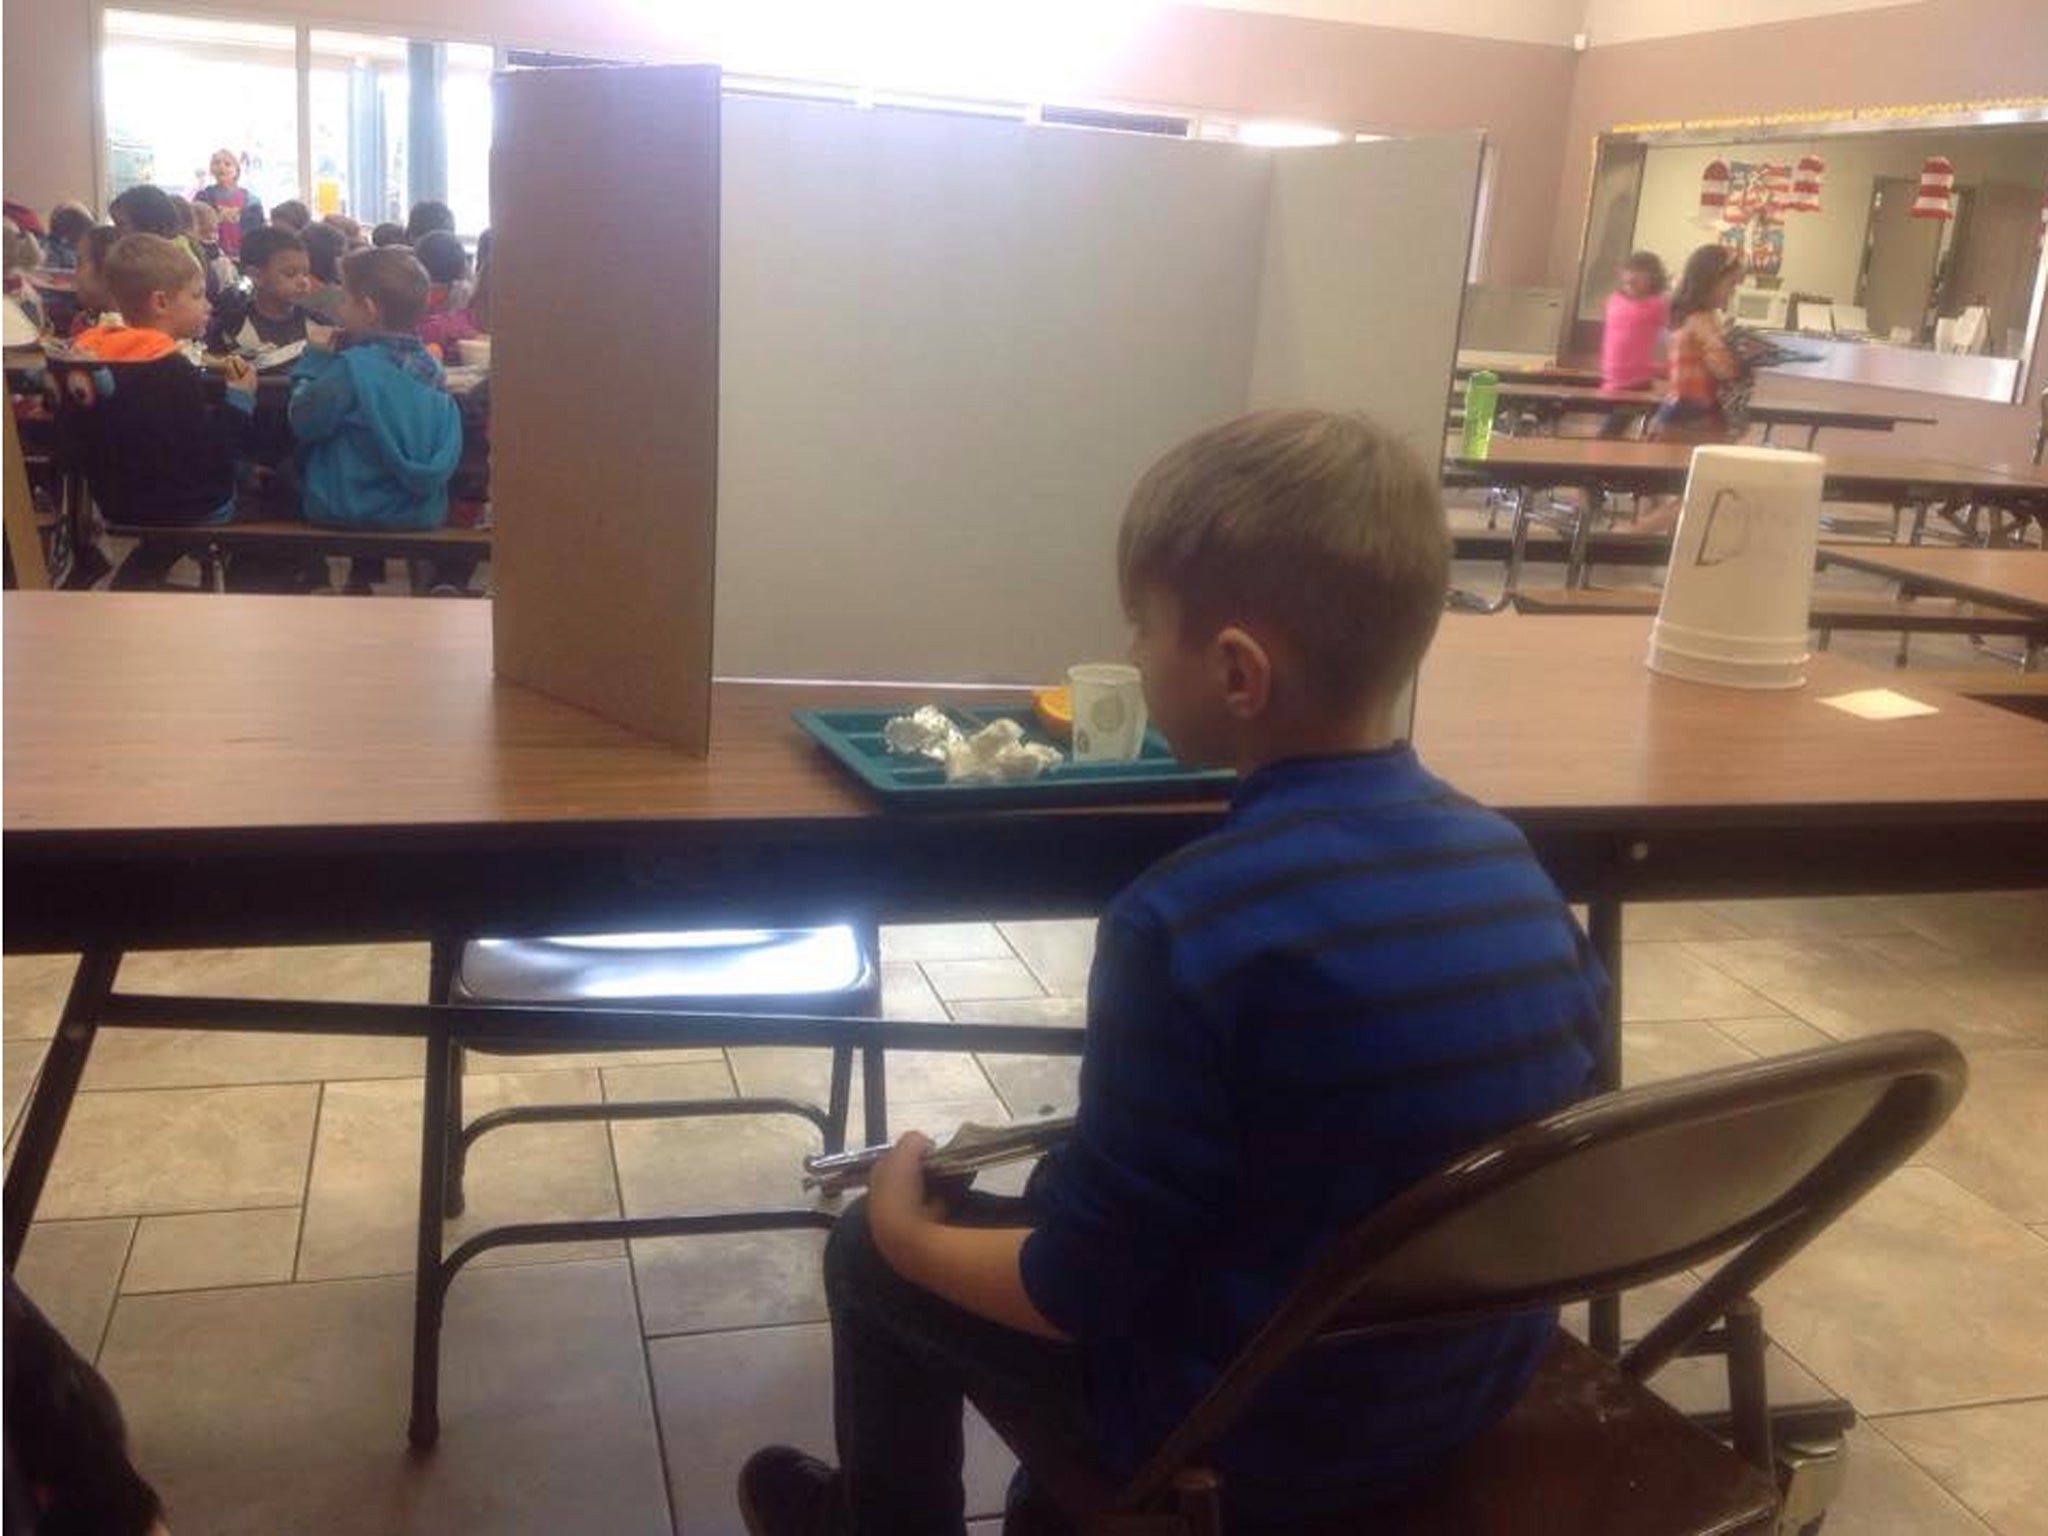 Image posted to Facebook by Hunter Cmelo's grandmother shows the six-year-old being made to eat behind a screen